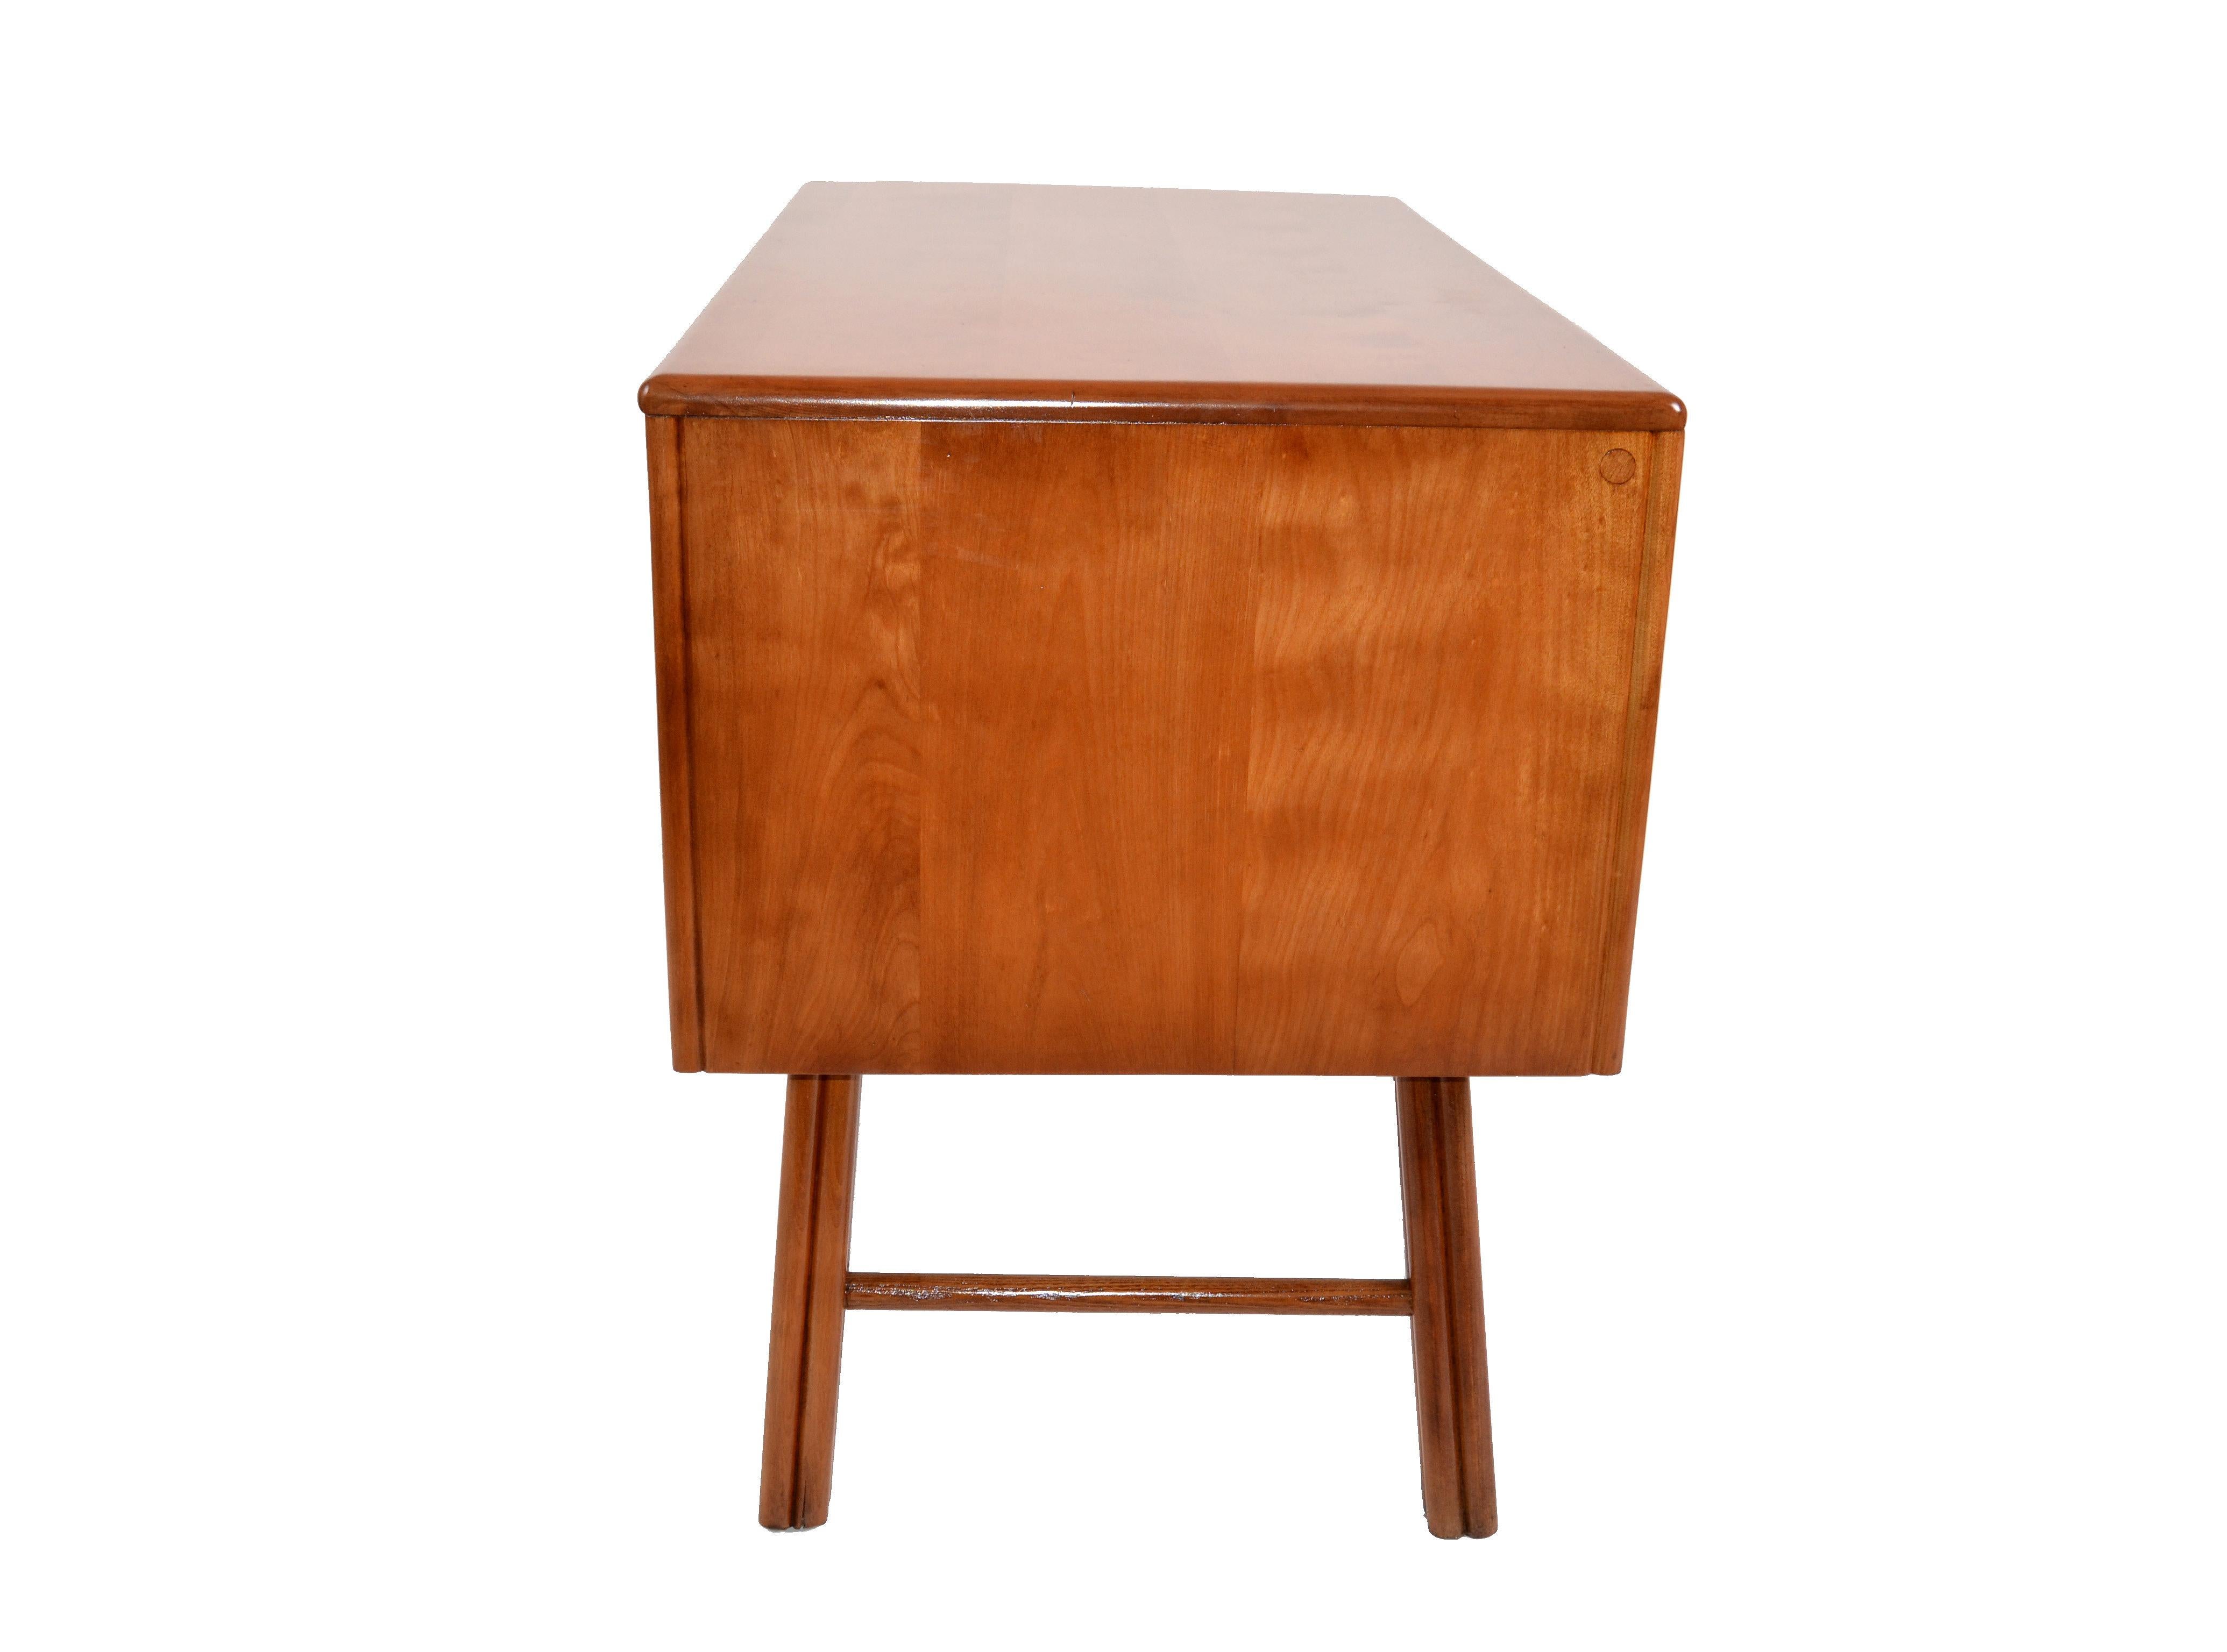 American Boho Chic Vintage Handcrafted Bamboo Desk, Writing Desk with Two Drawers, 1970s